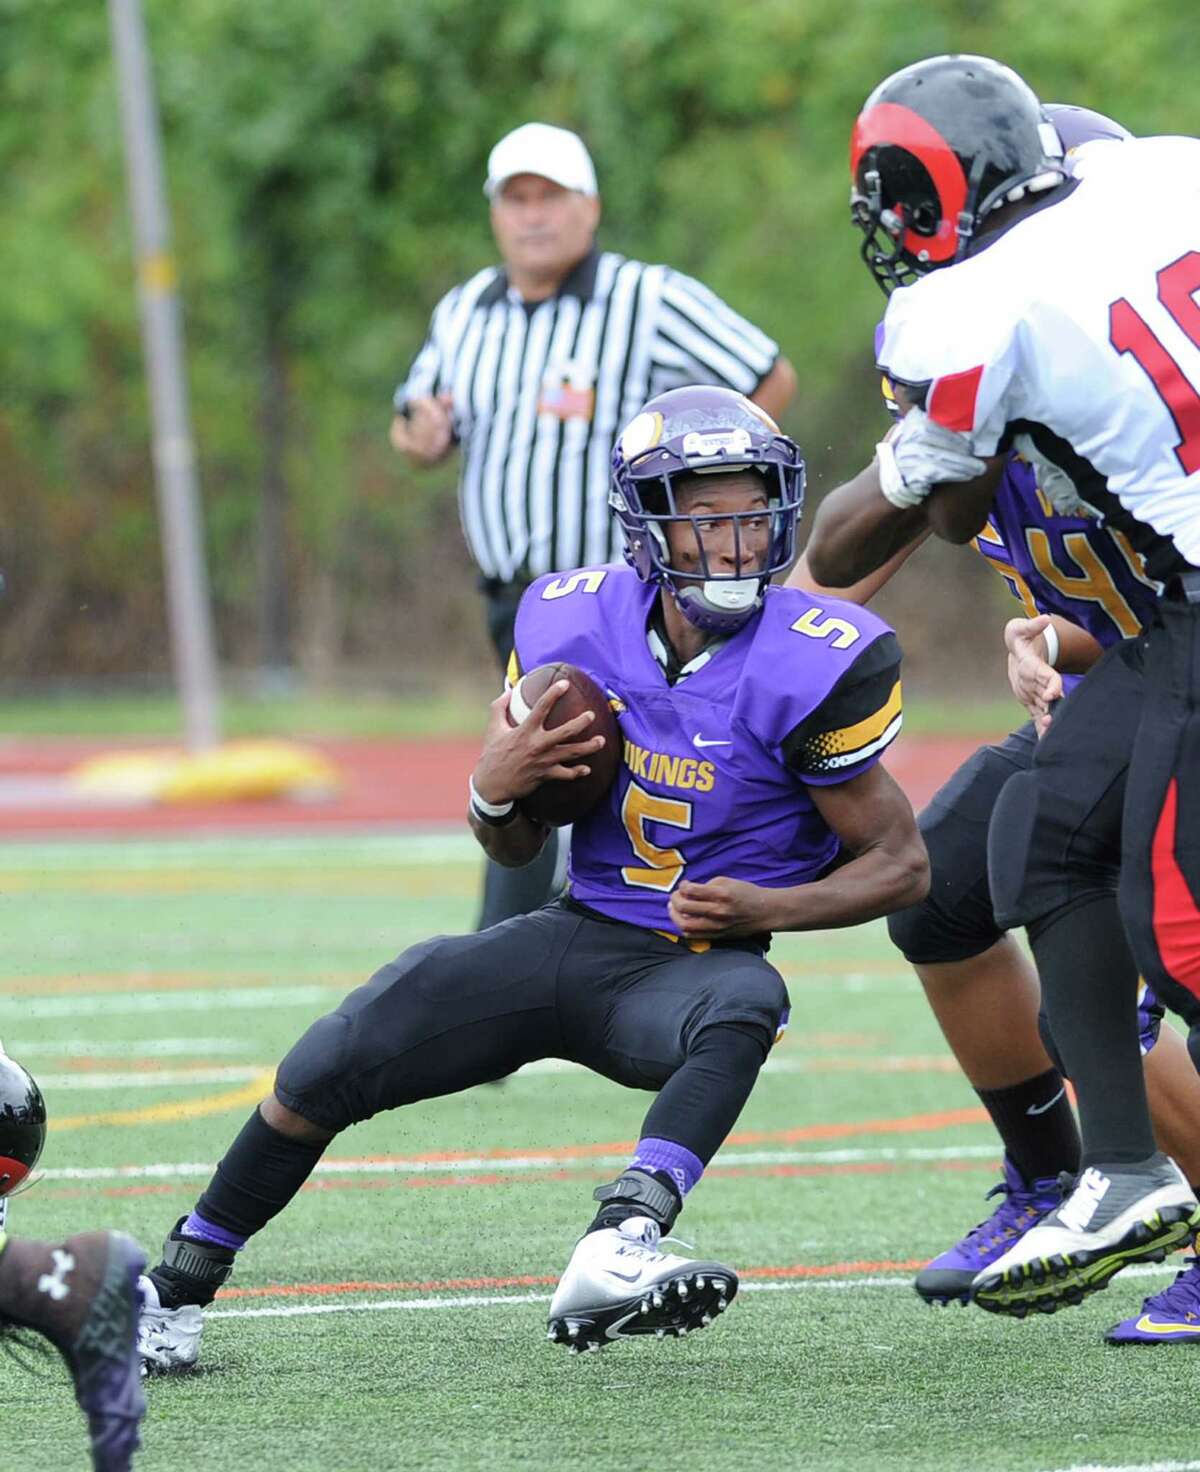 Westhill High football player Aaron Pettiford looks to gain ground against Bridgeport Central in Stamford on Sept. 12. Pettiford is on a kidney transplant waiting list at Yale.